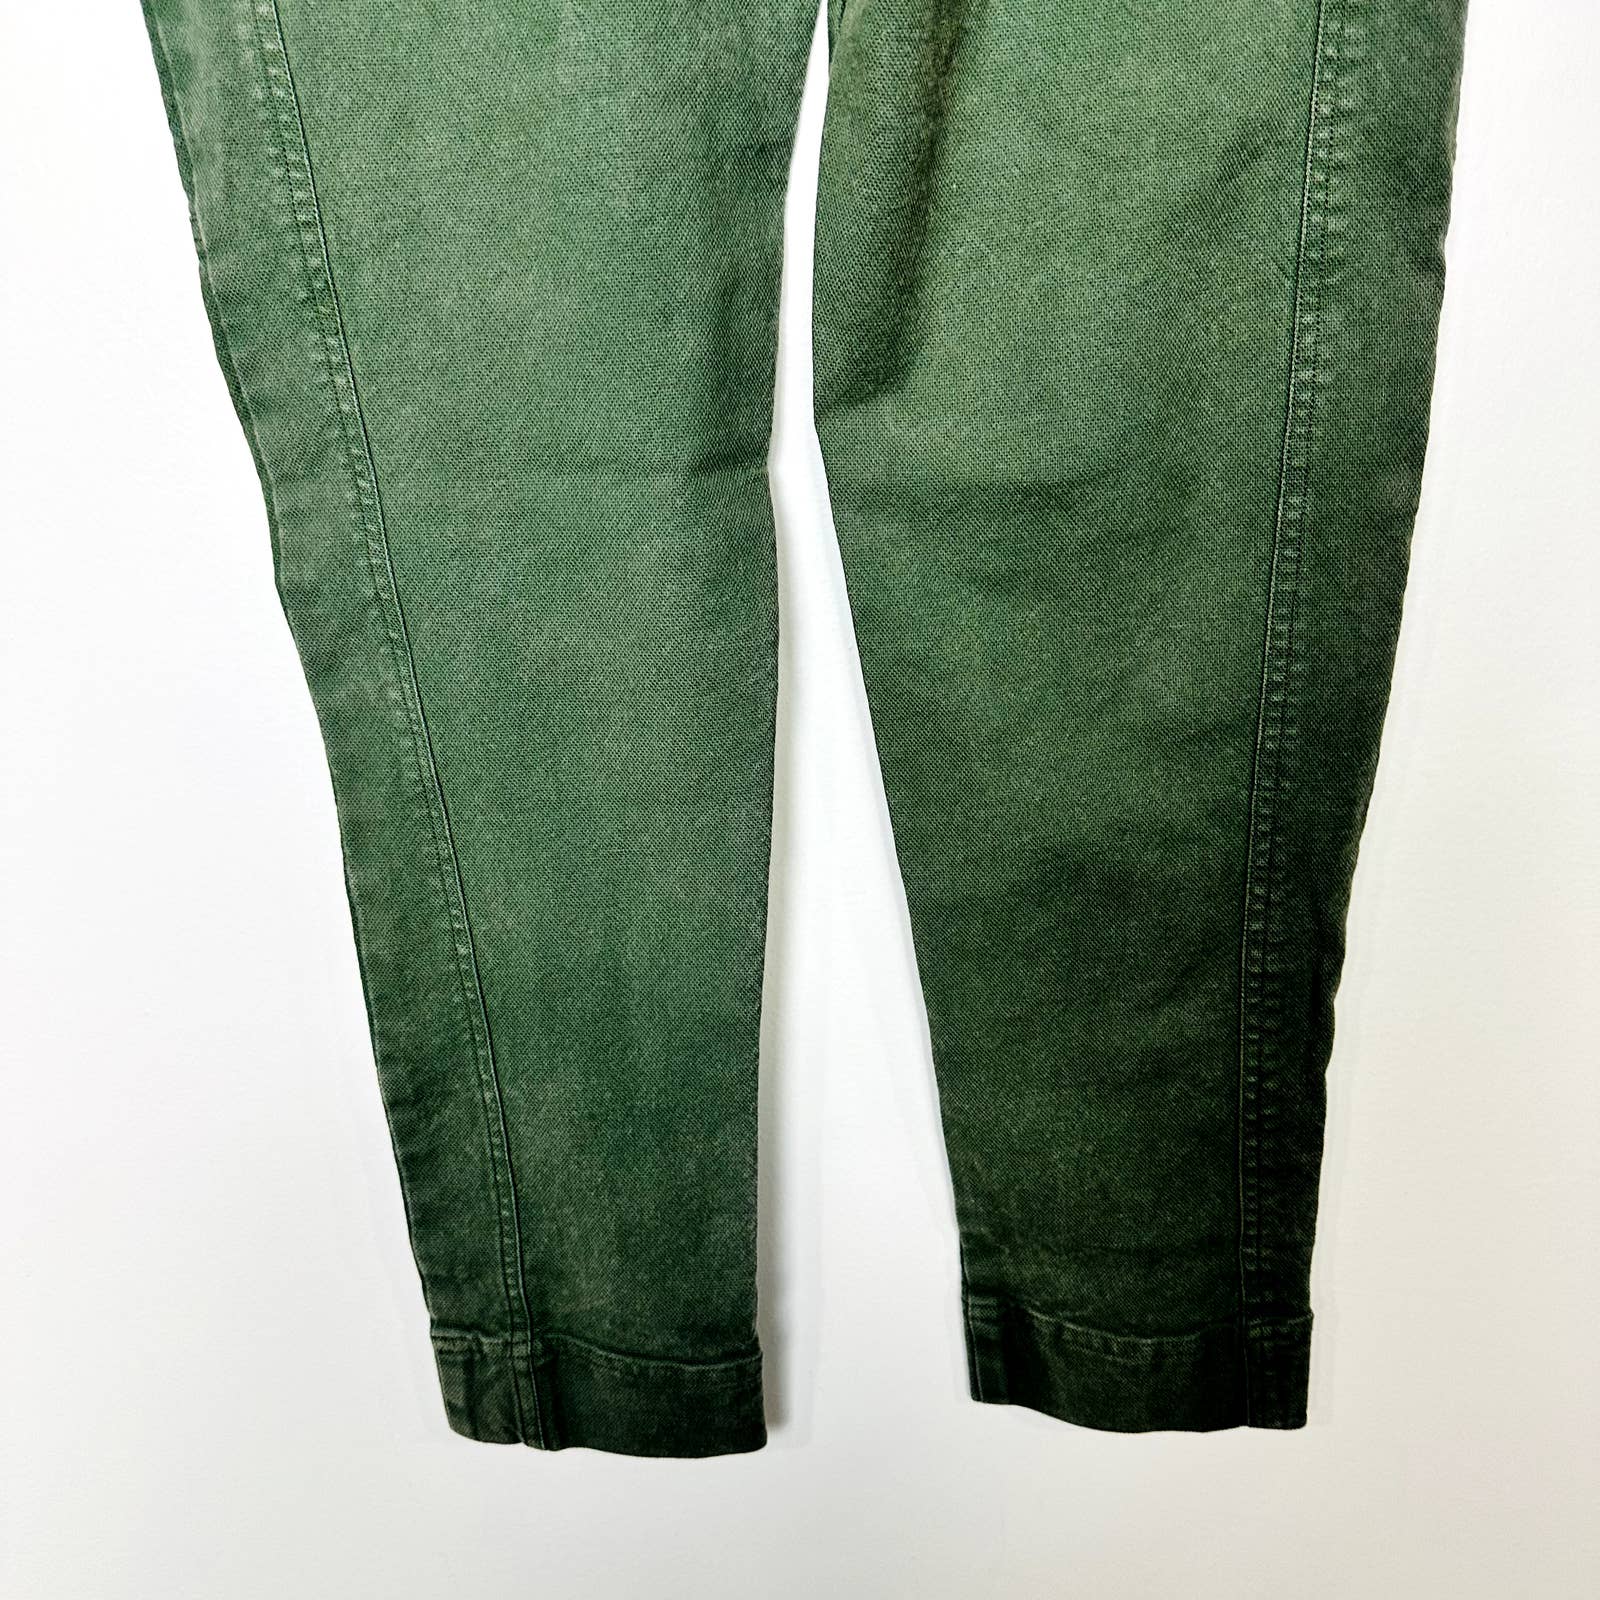 Chaser NWT Button Fly High Rise Moto Utility Skinny Pants Vintage Green Sz Small